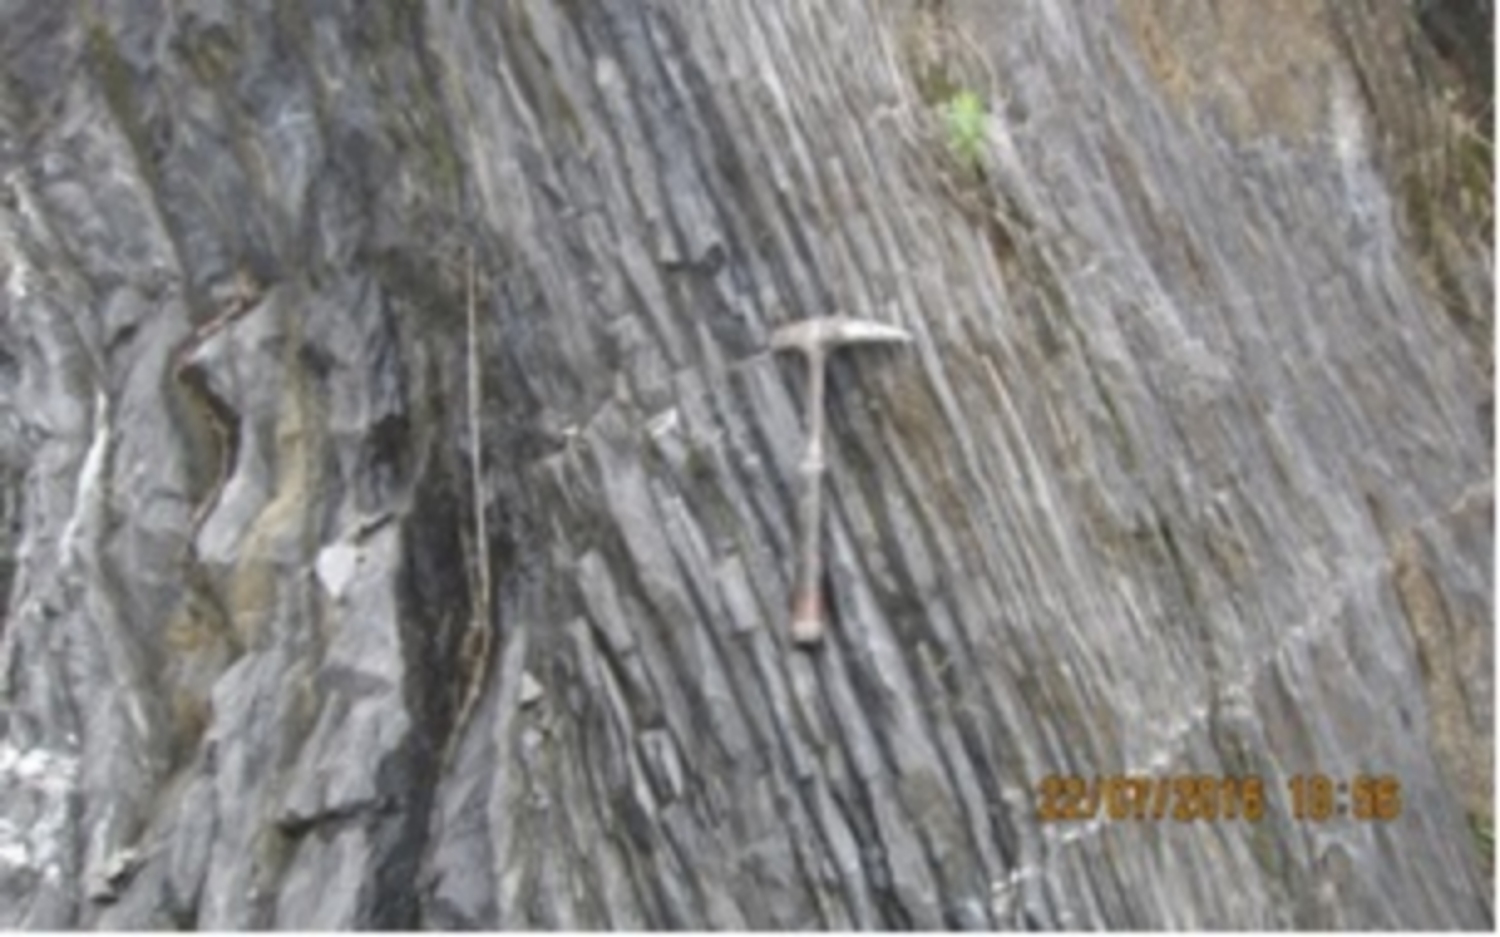 Unconformity boundary between upper Cambrian and lower-middle Devonian sedimentary rocks containing bivalve fossils in Luu Ngoc commune